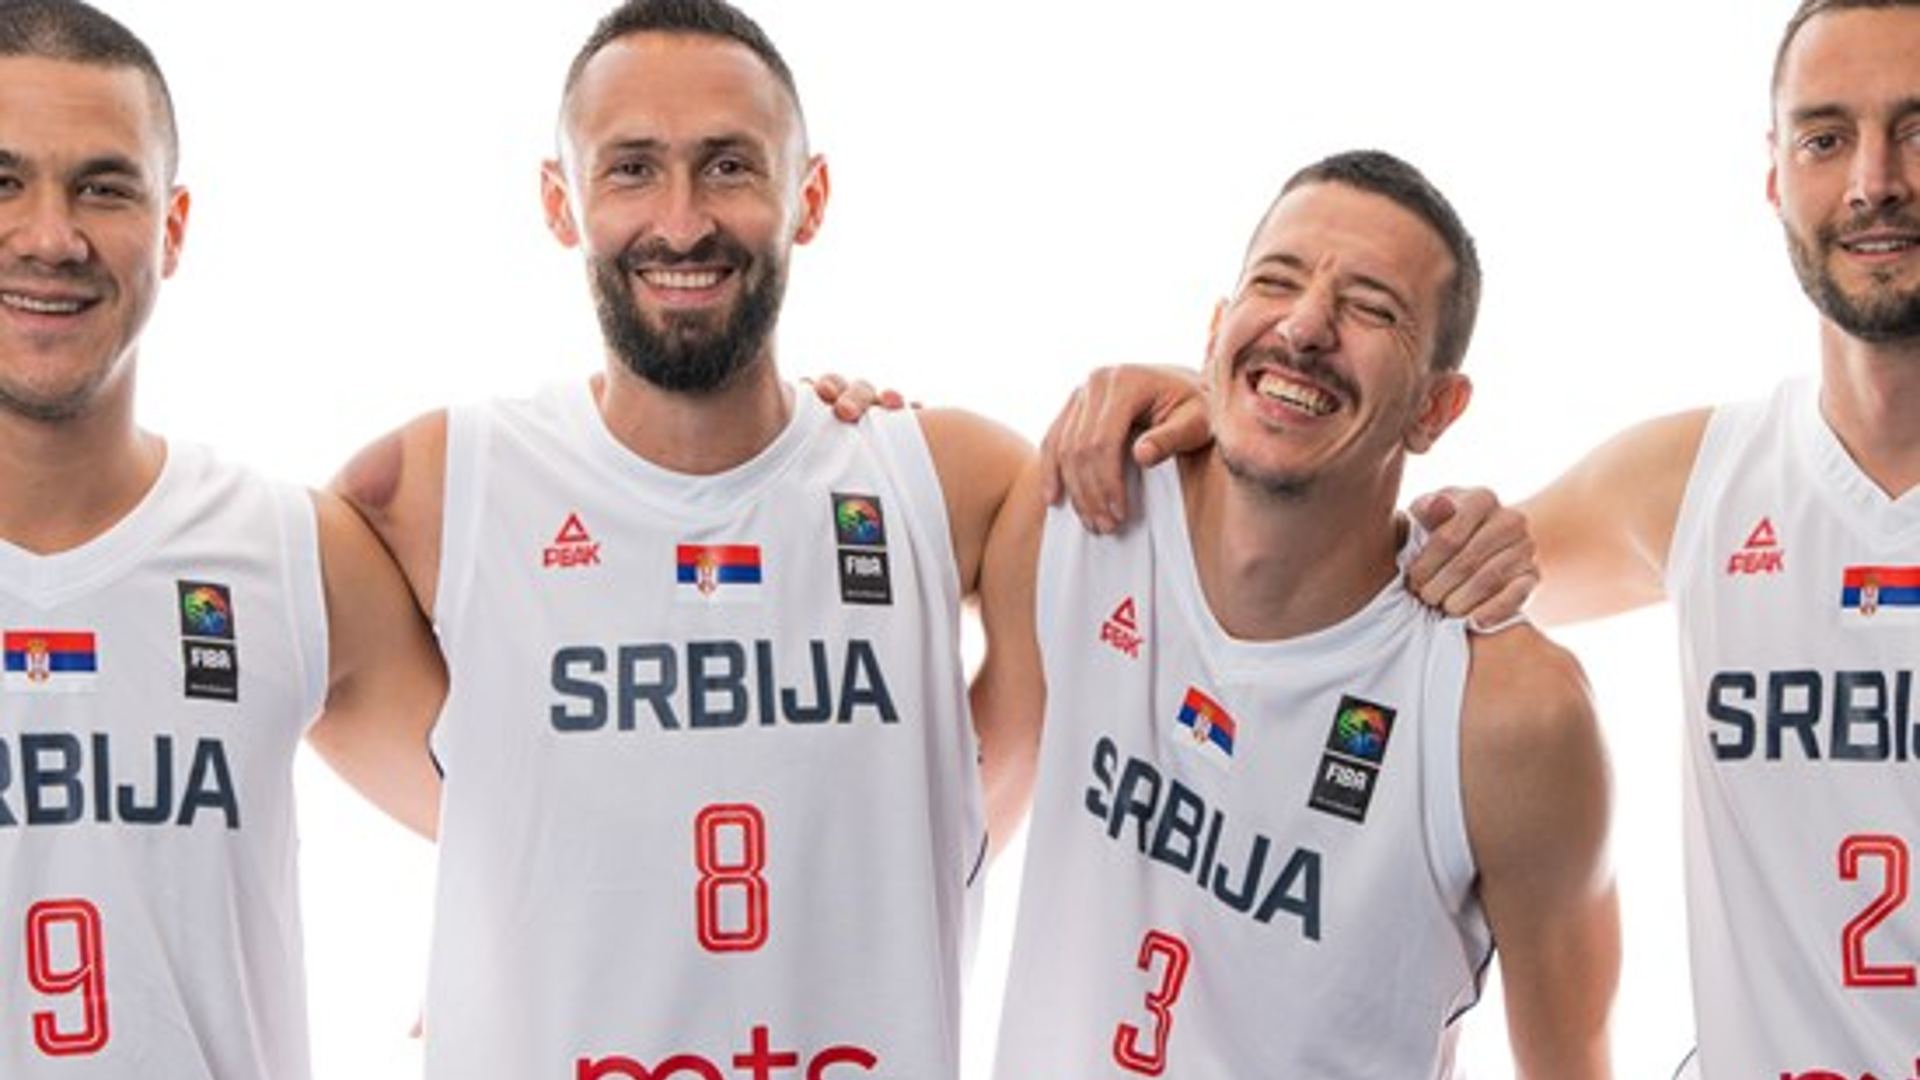 The FIBA European Cup 3x3 match between Serbia vs Slovenia will be held at Graz on Saturday, September 10 at 3:25 PM (International time), and September 10, 6:55 PM (Indian time).